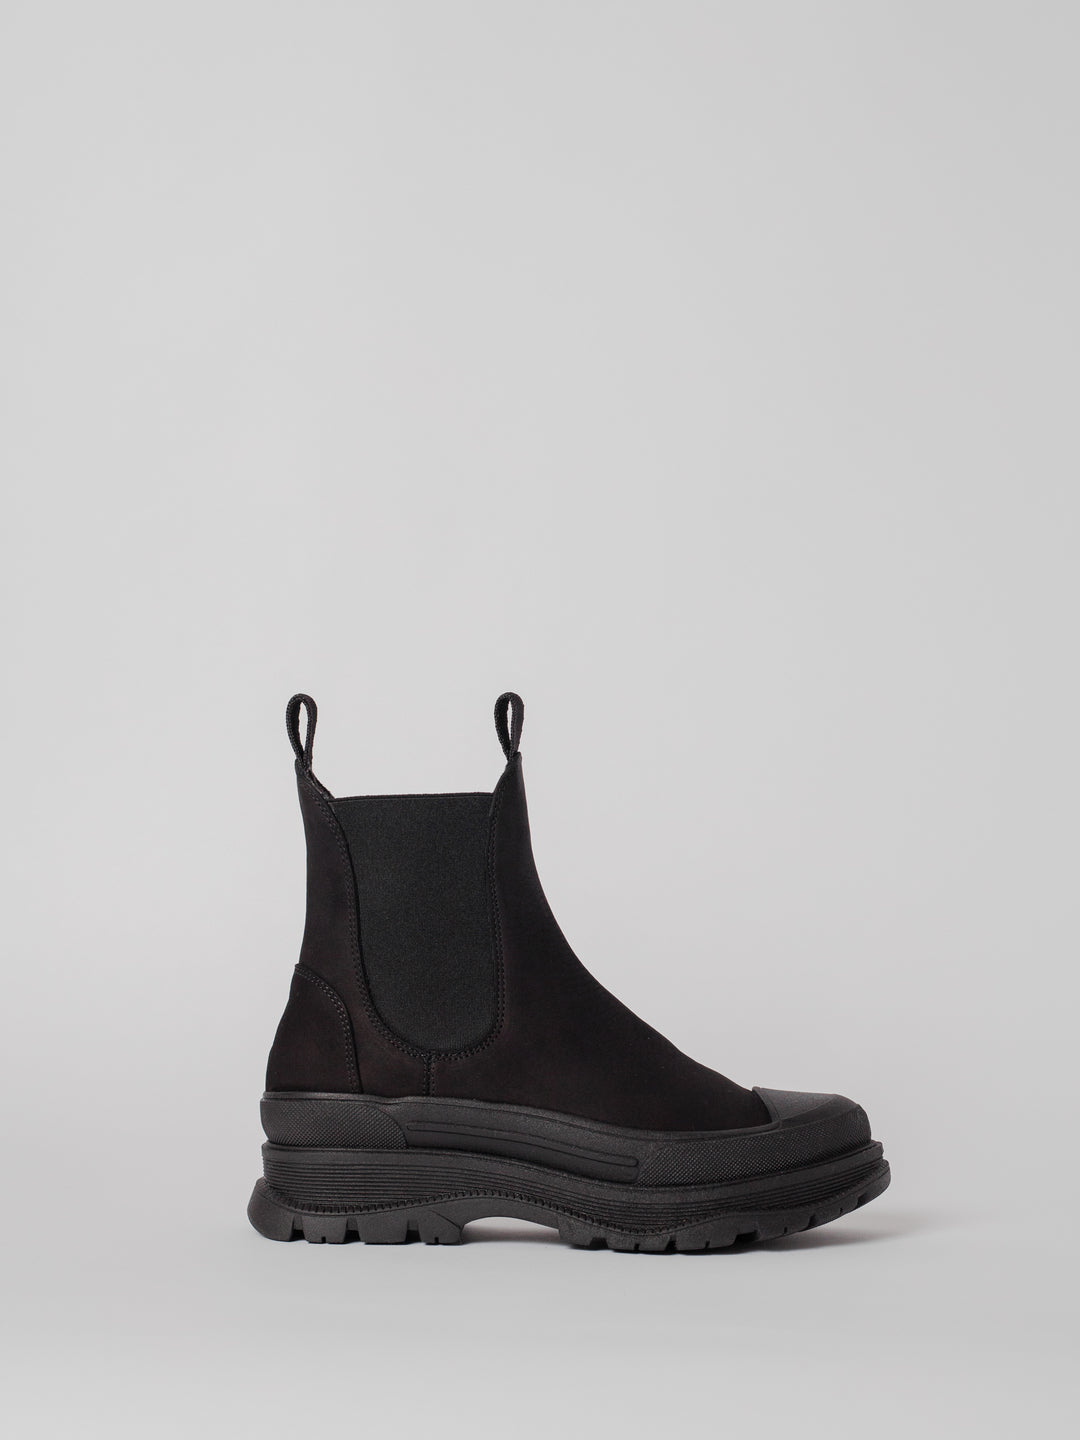 Blankens The Baltimore Water Resistant Leather Boot black boot with black platform sole